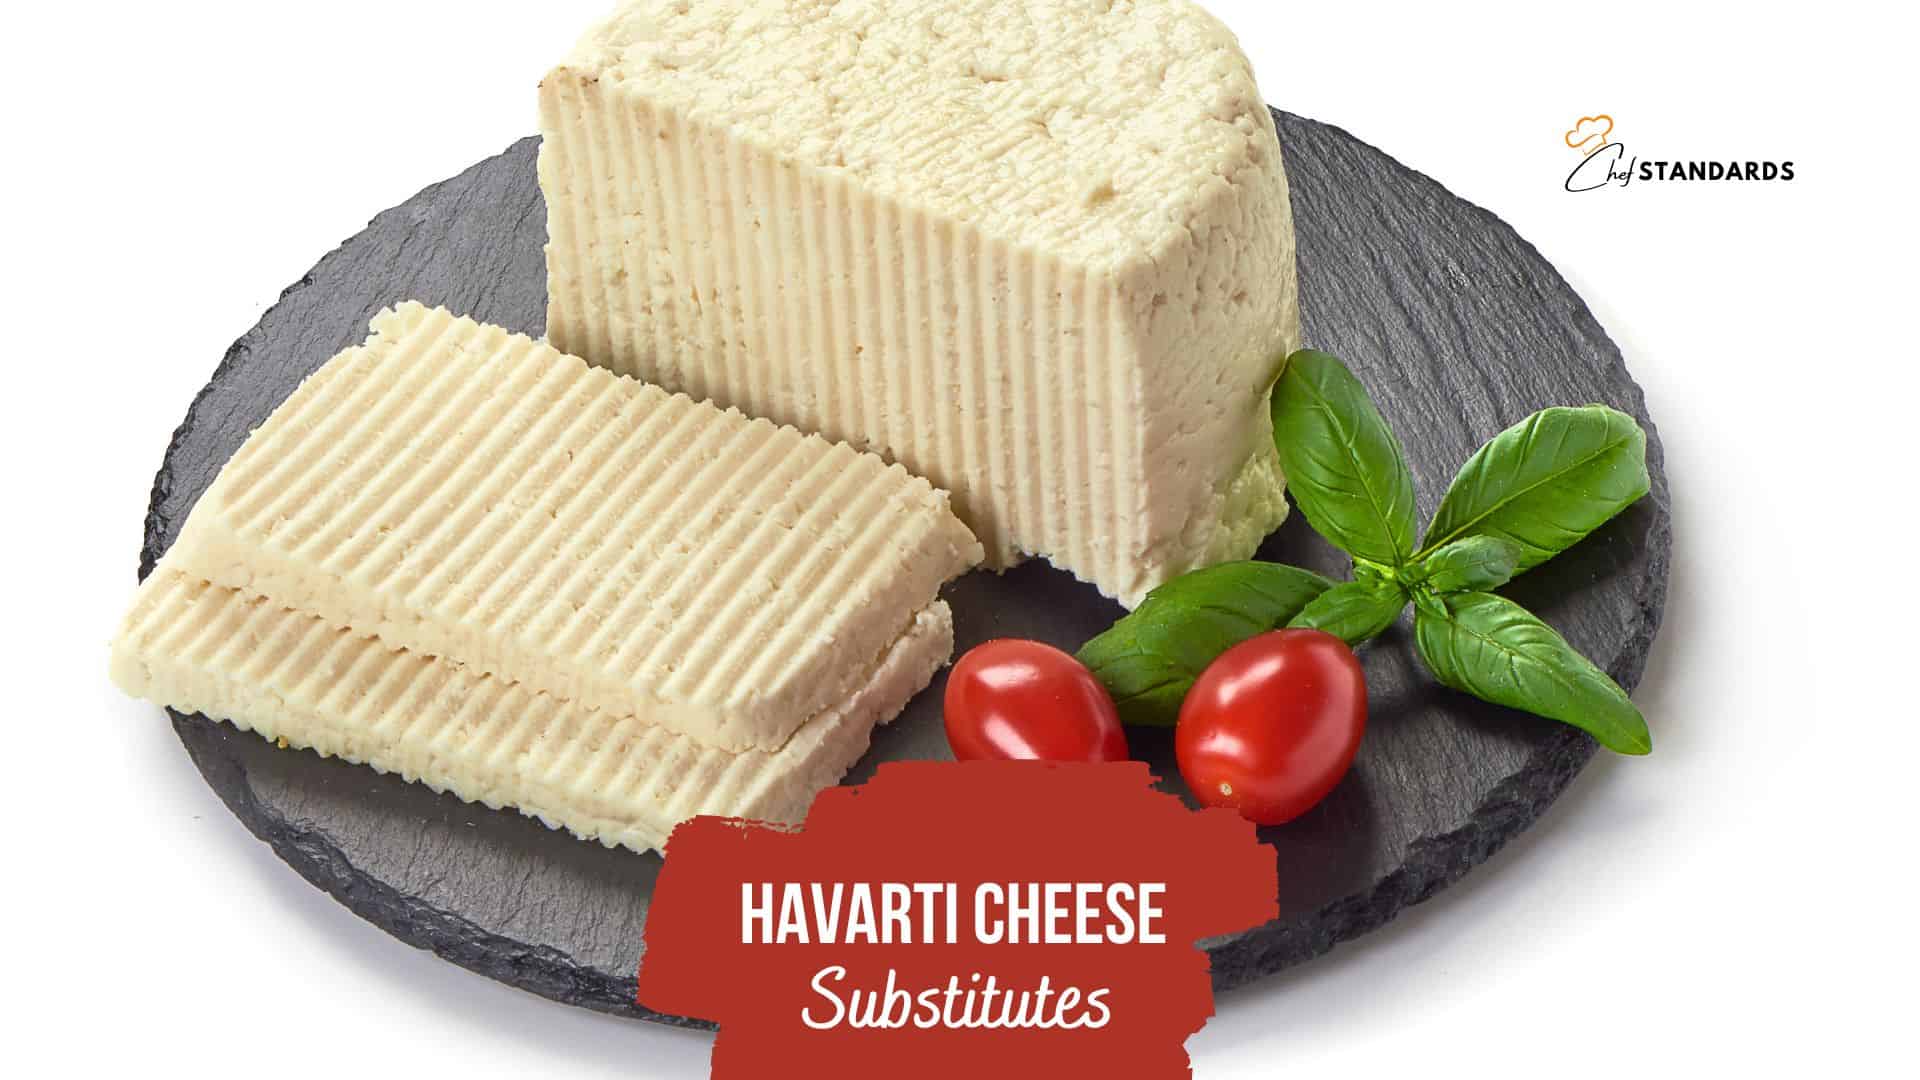 havarti cheese on a plate